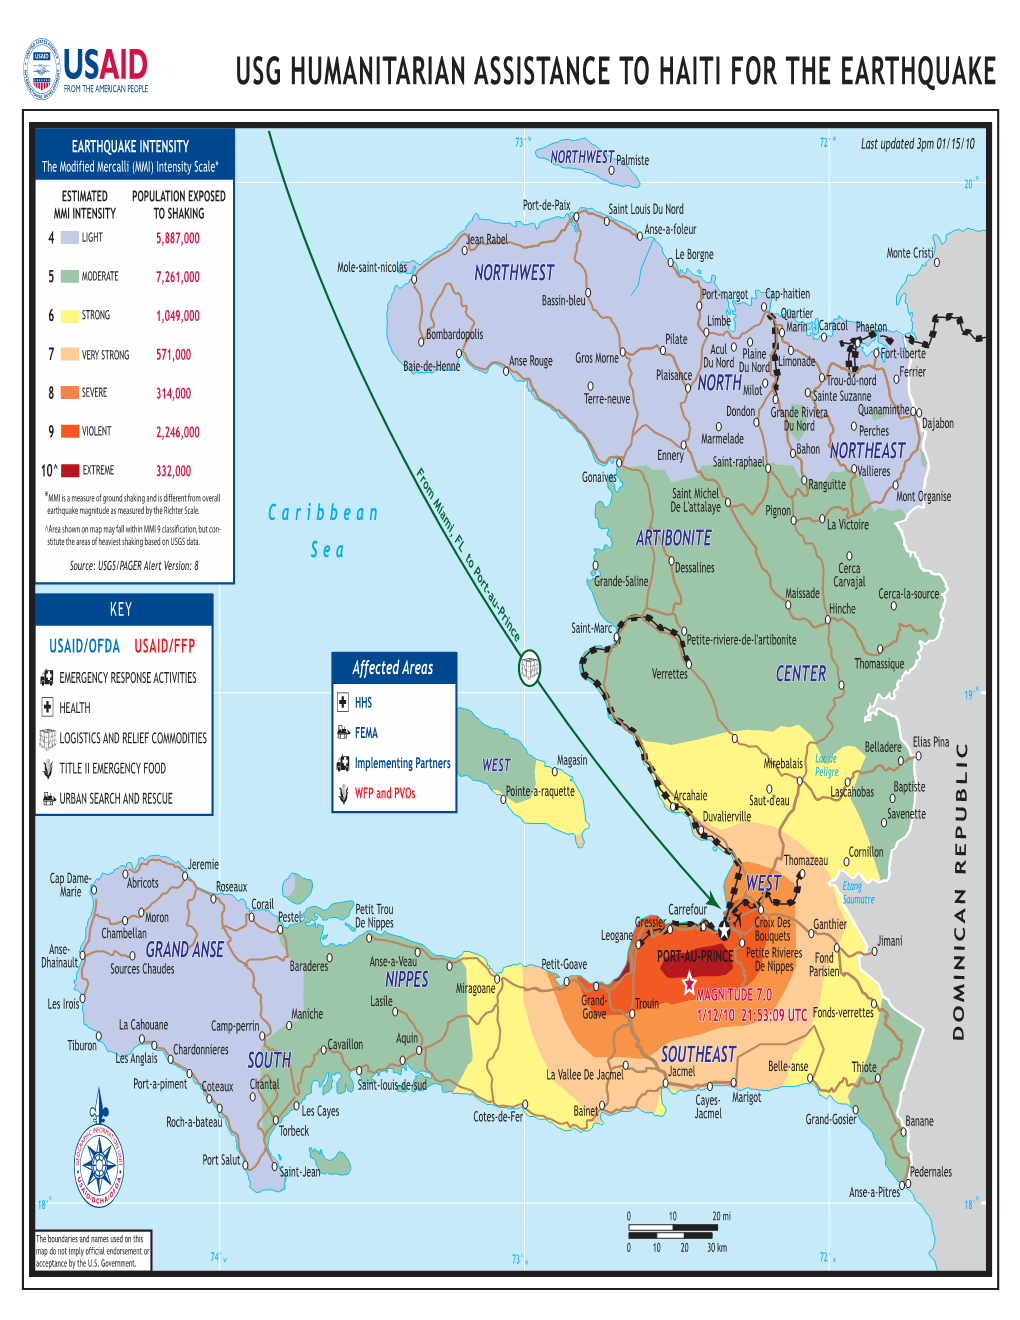 U.S. Government Humanitarian Assistance to Haitii for the Earthquake